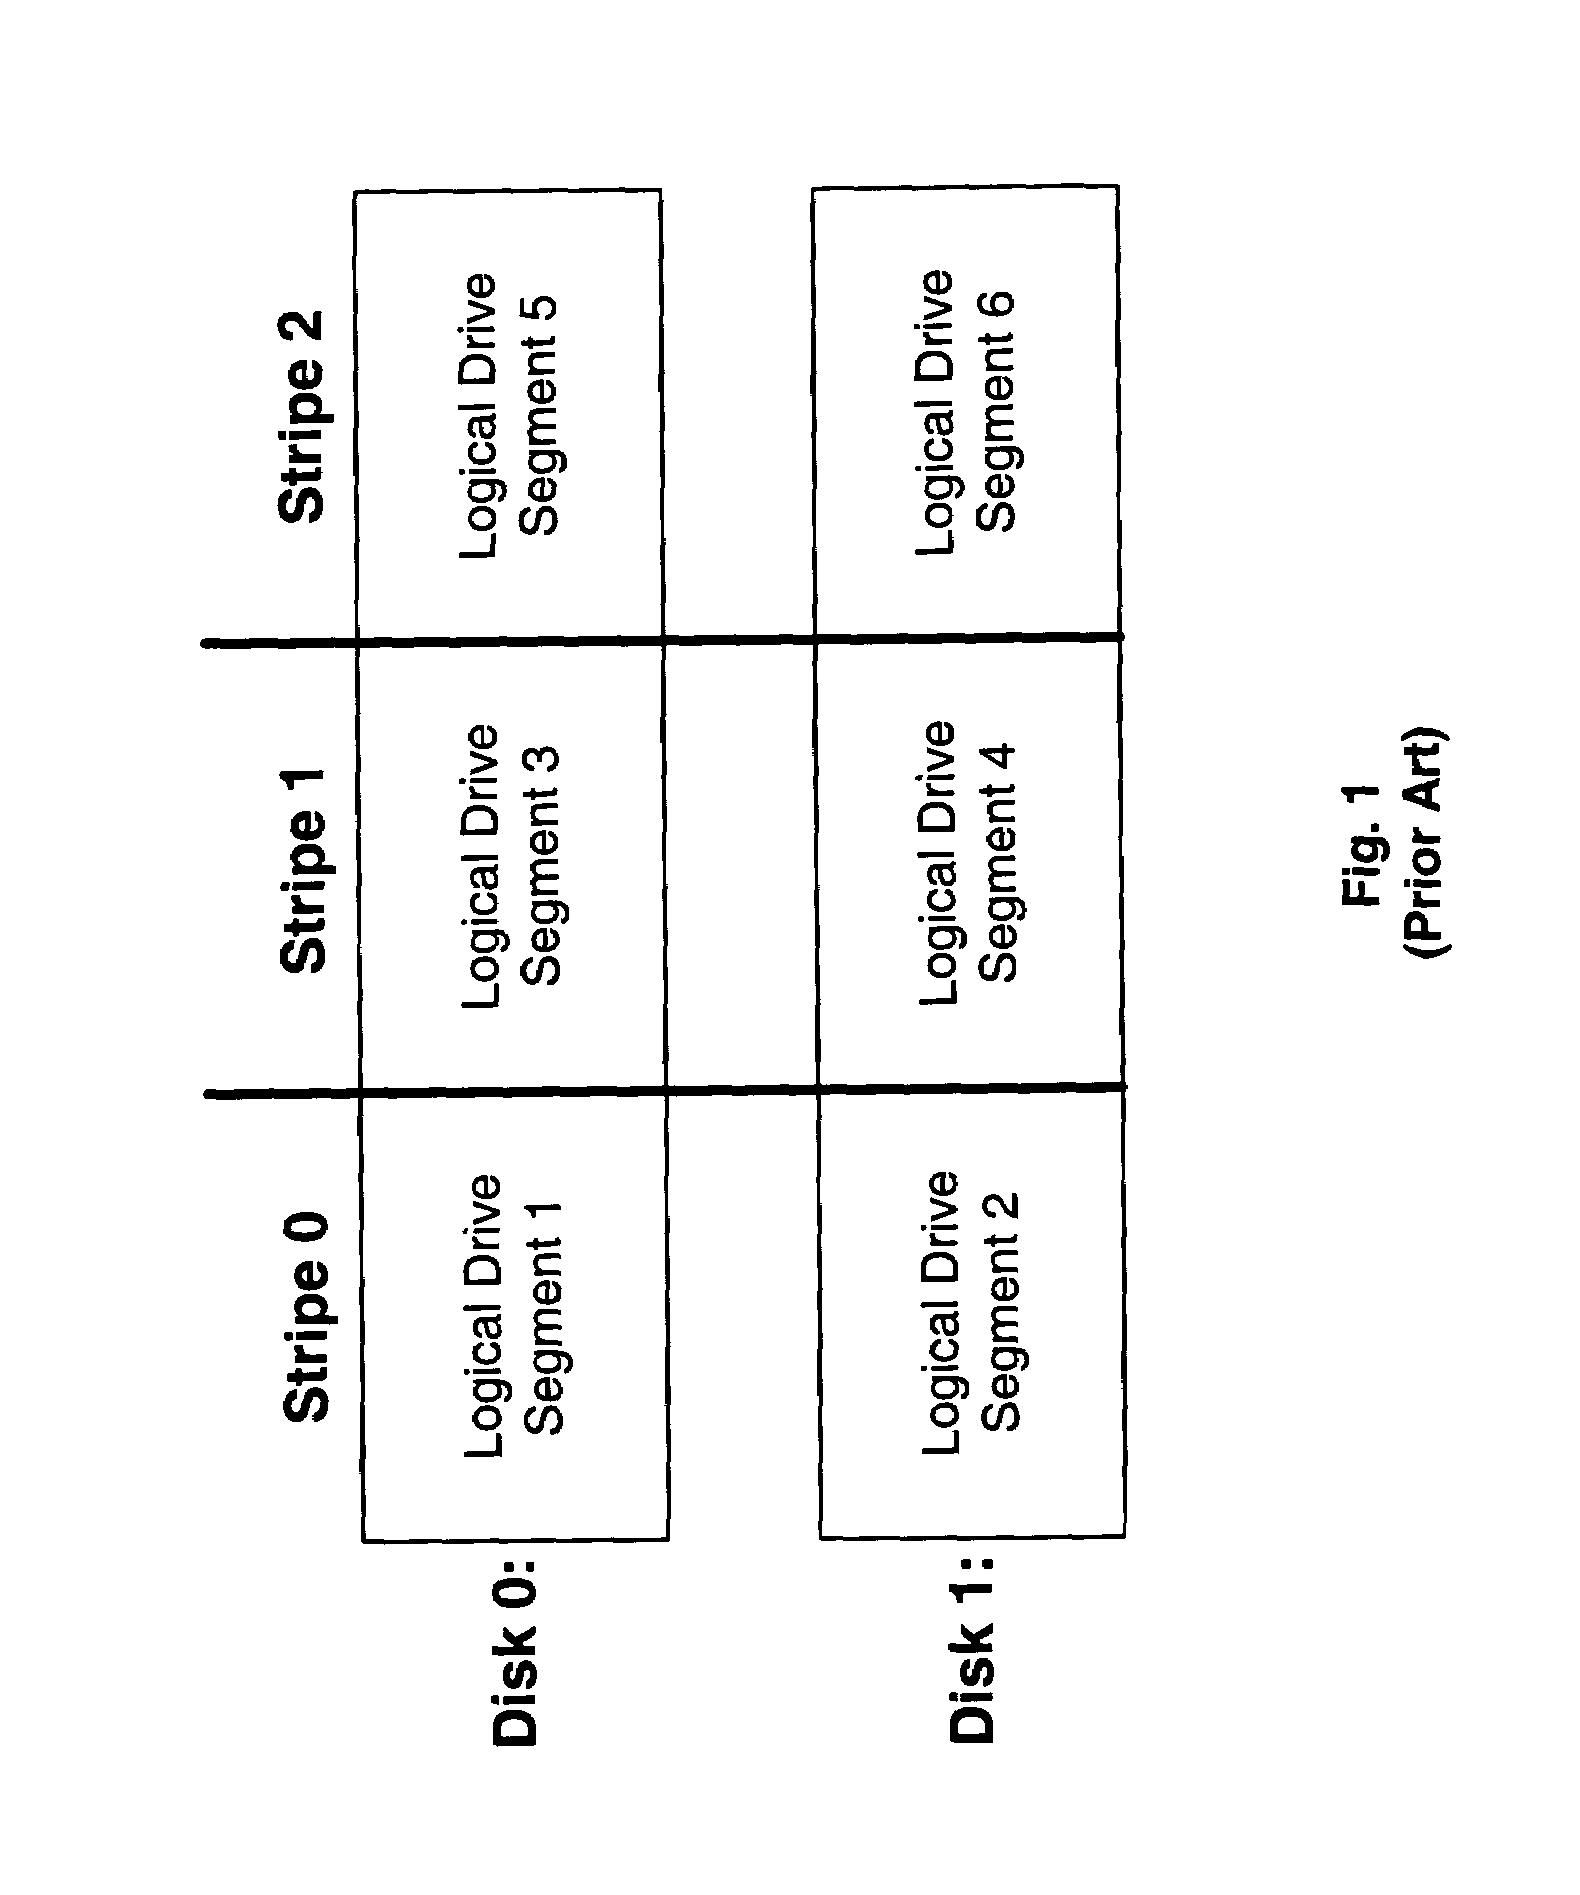 Method and apparatus for accessing a striped configuration of disks